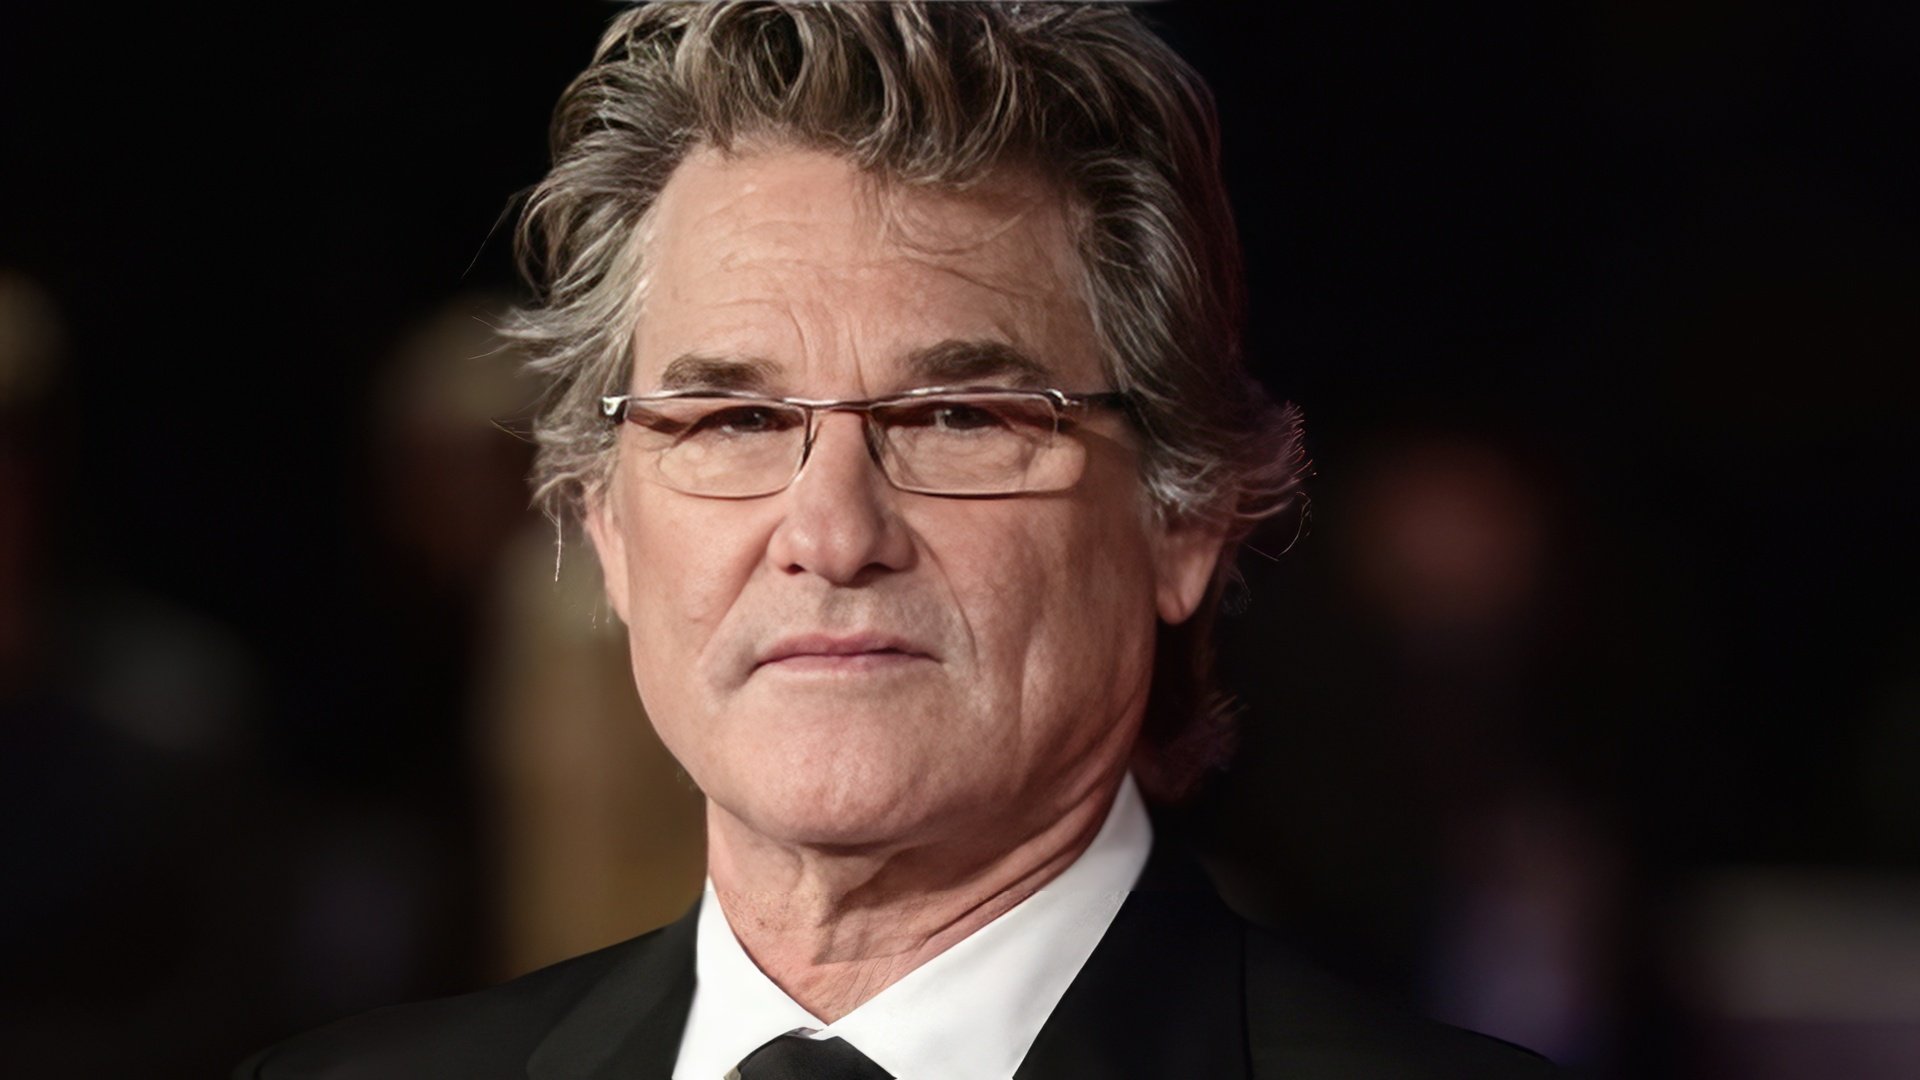 In the photo - Kurt Russell